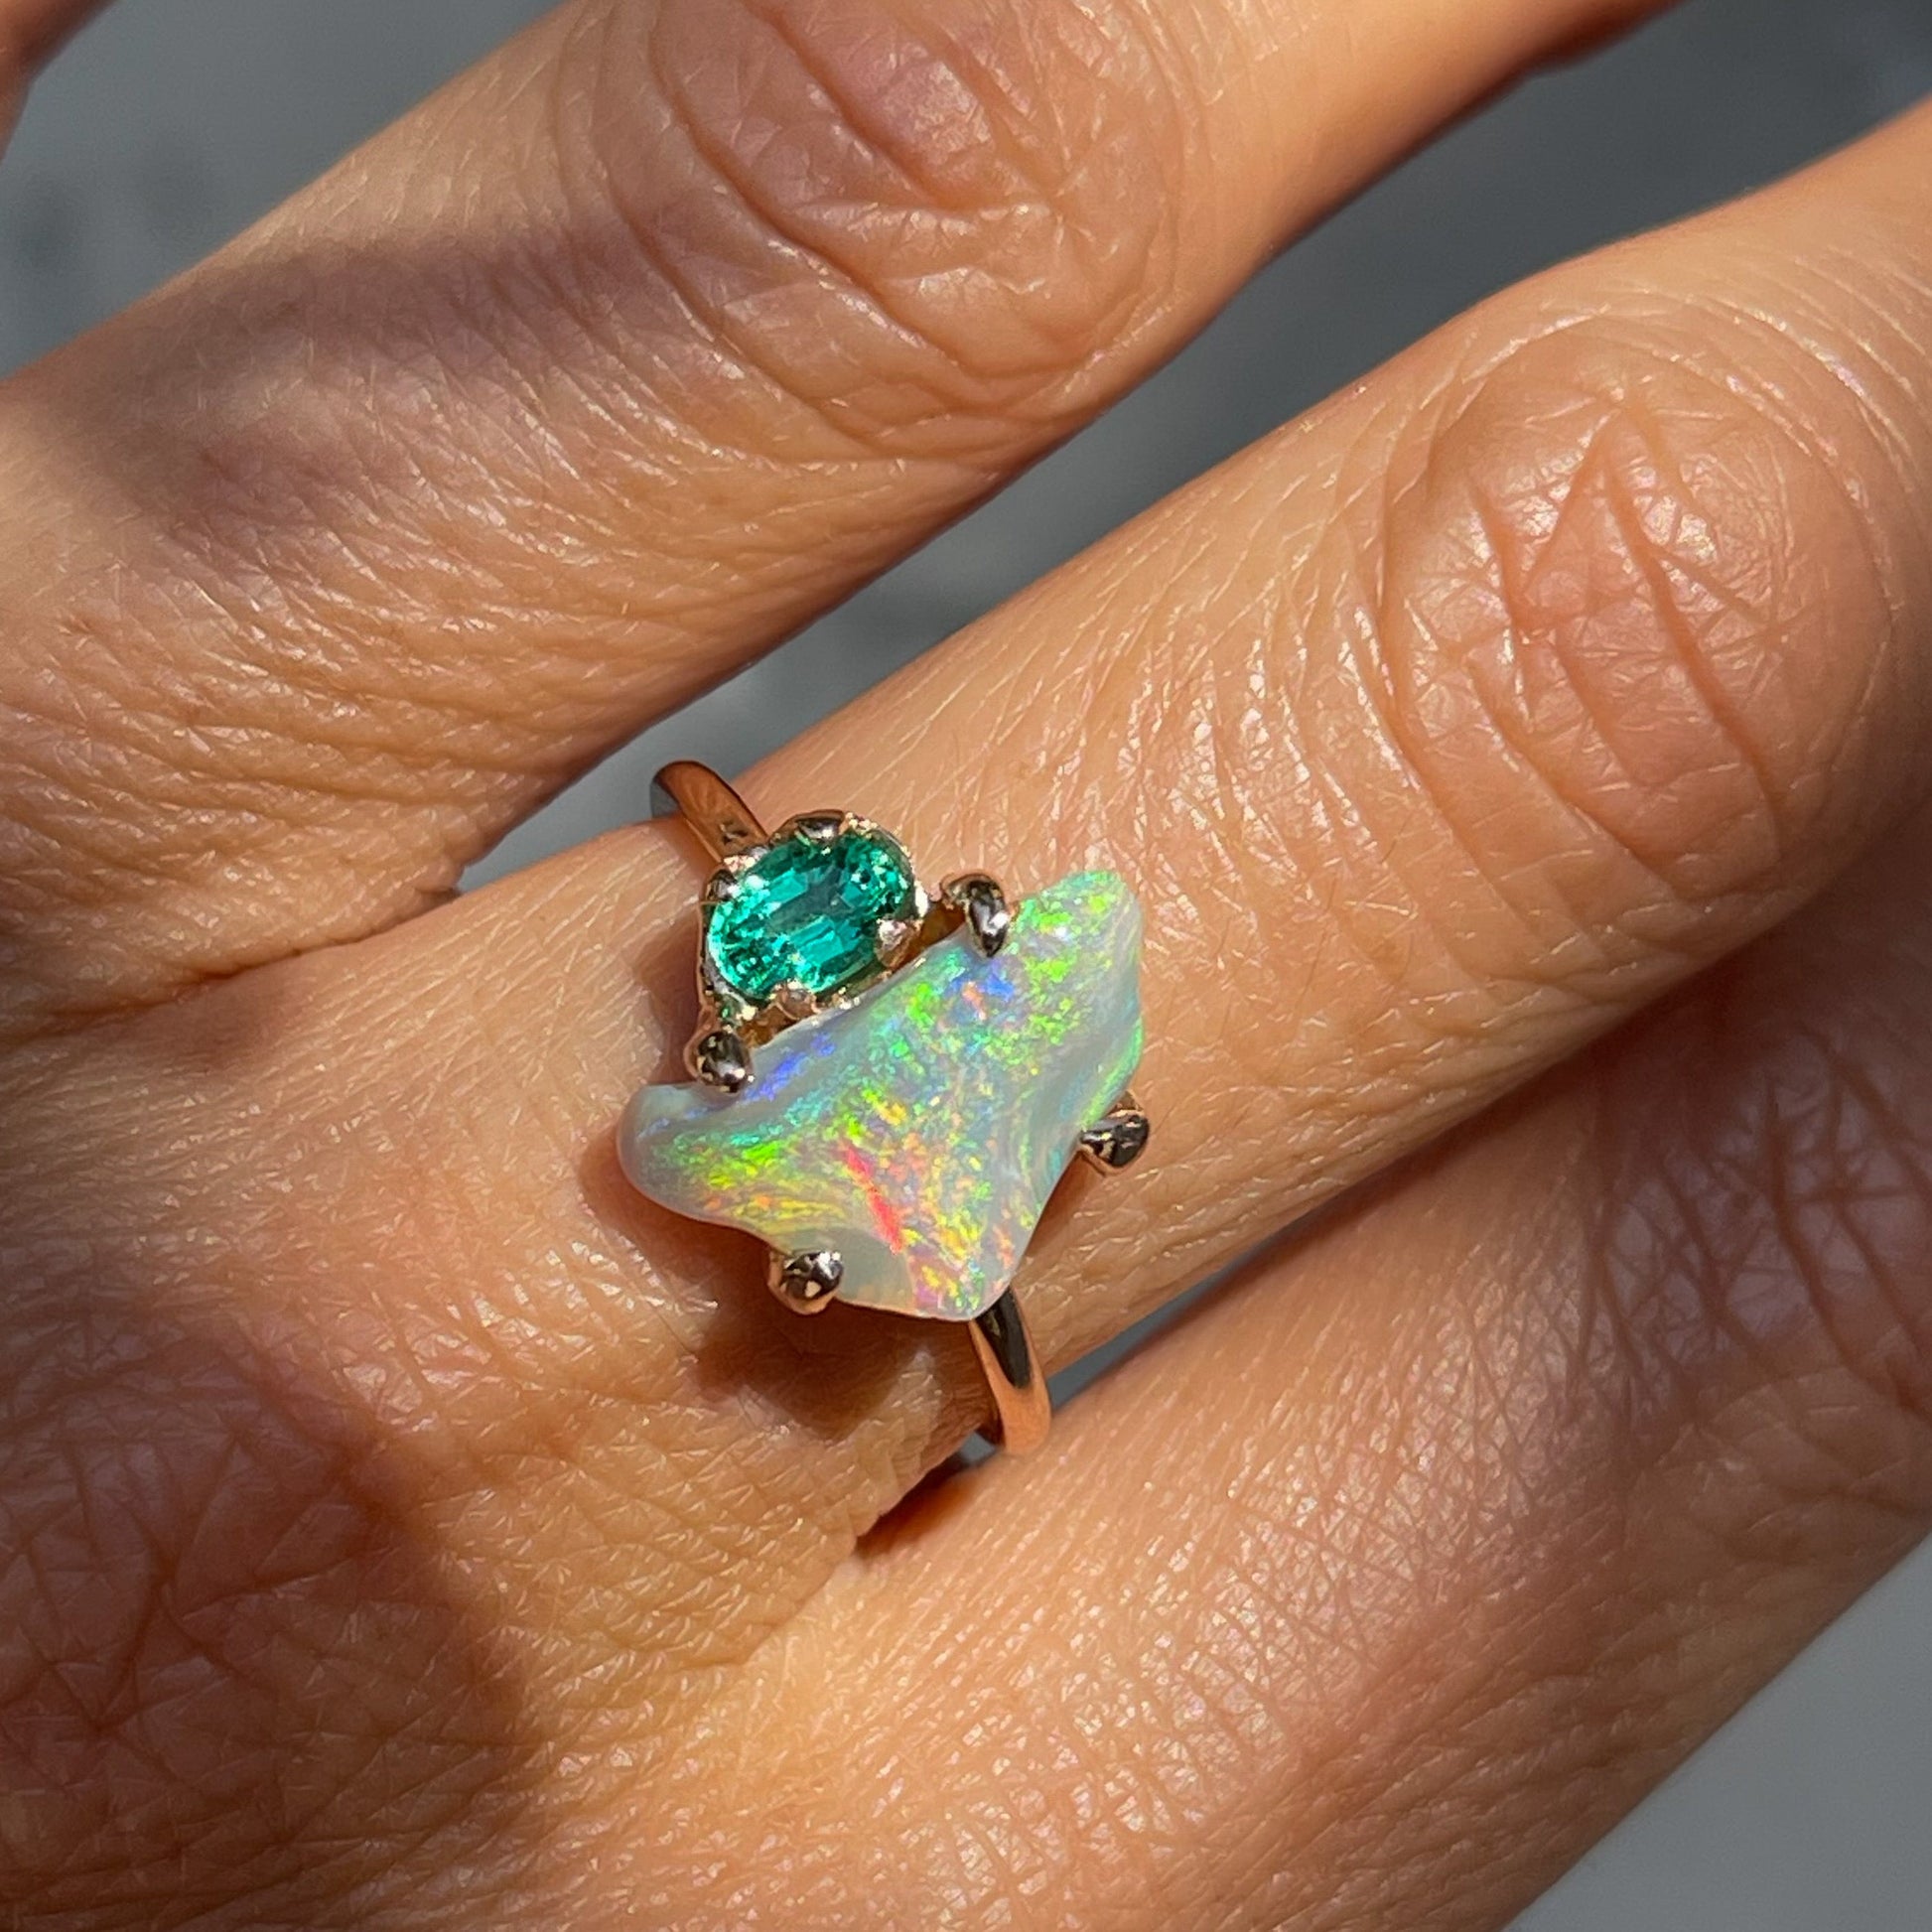 An Opal and Emerald Ring by NIXIN Jewelry modeled on a hand. The opal ring is among the rare jewelry offerings on NIXINjewelry.com.